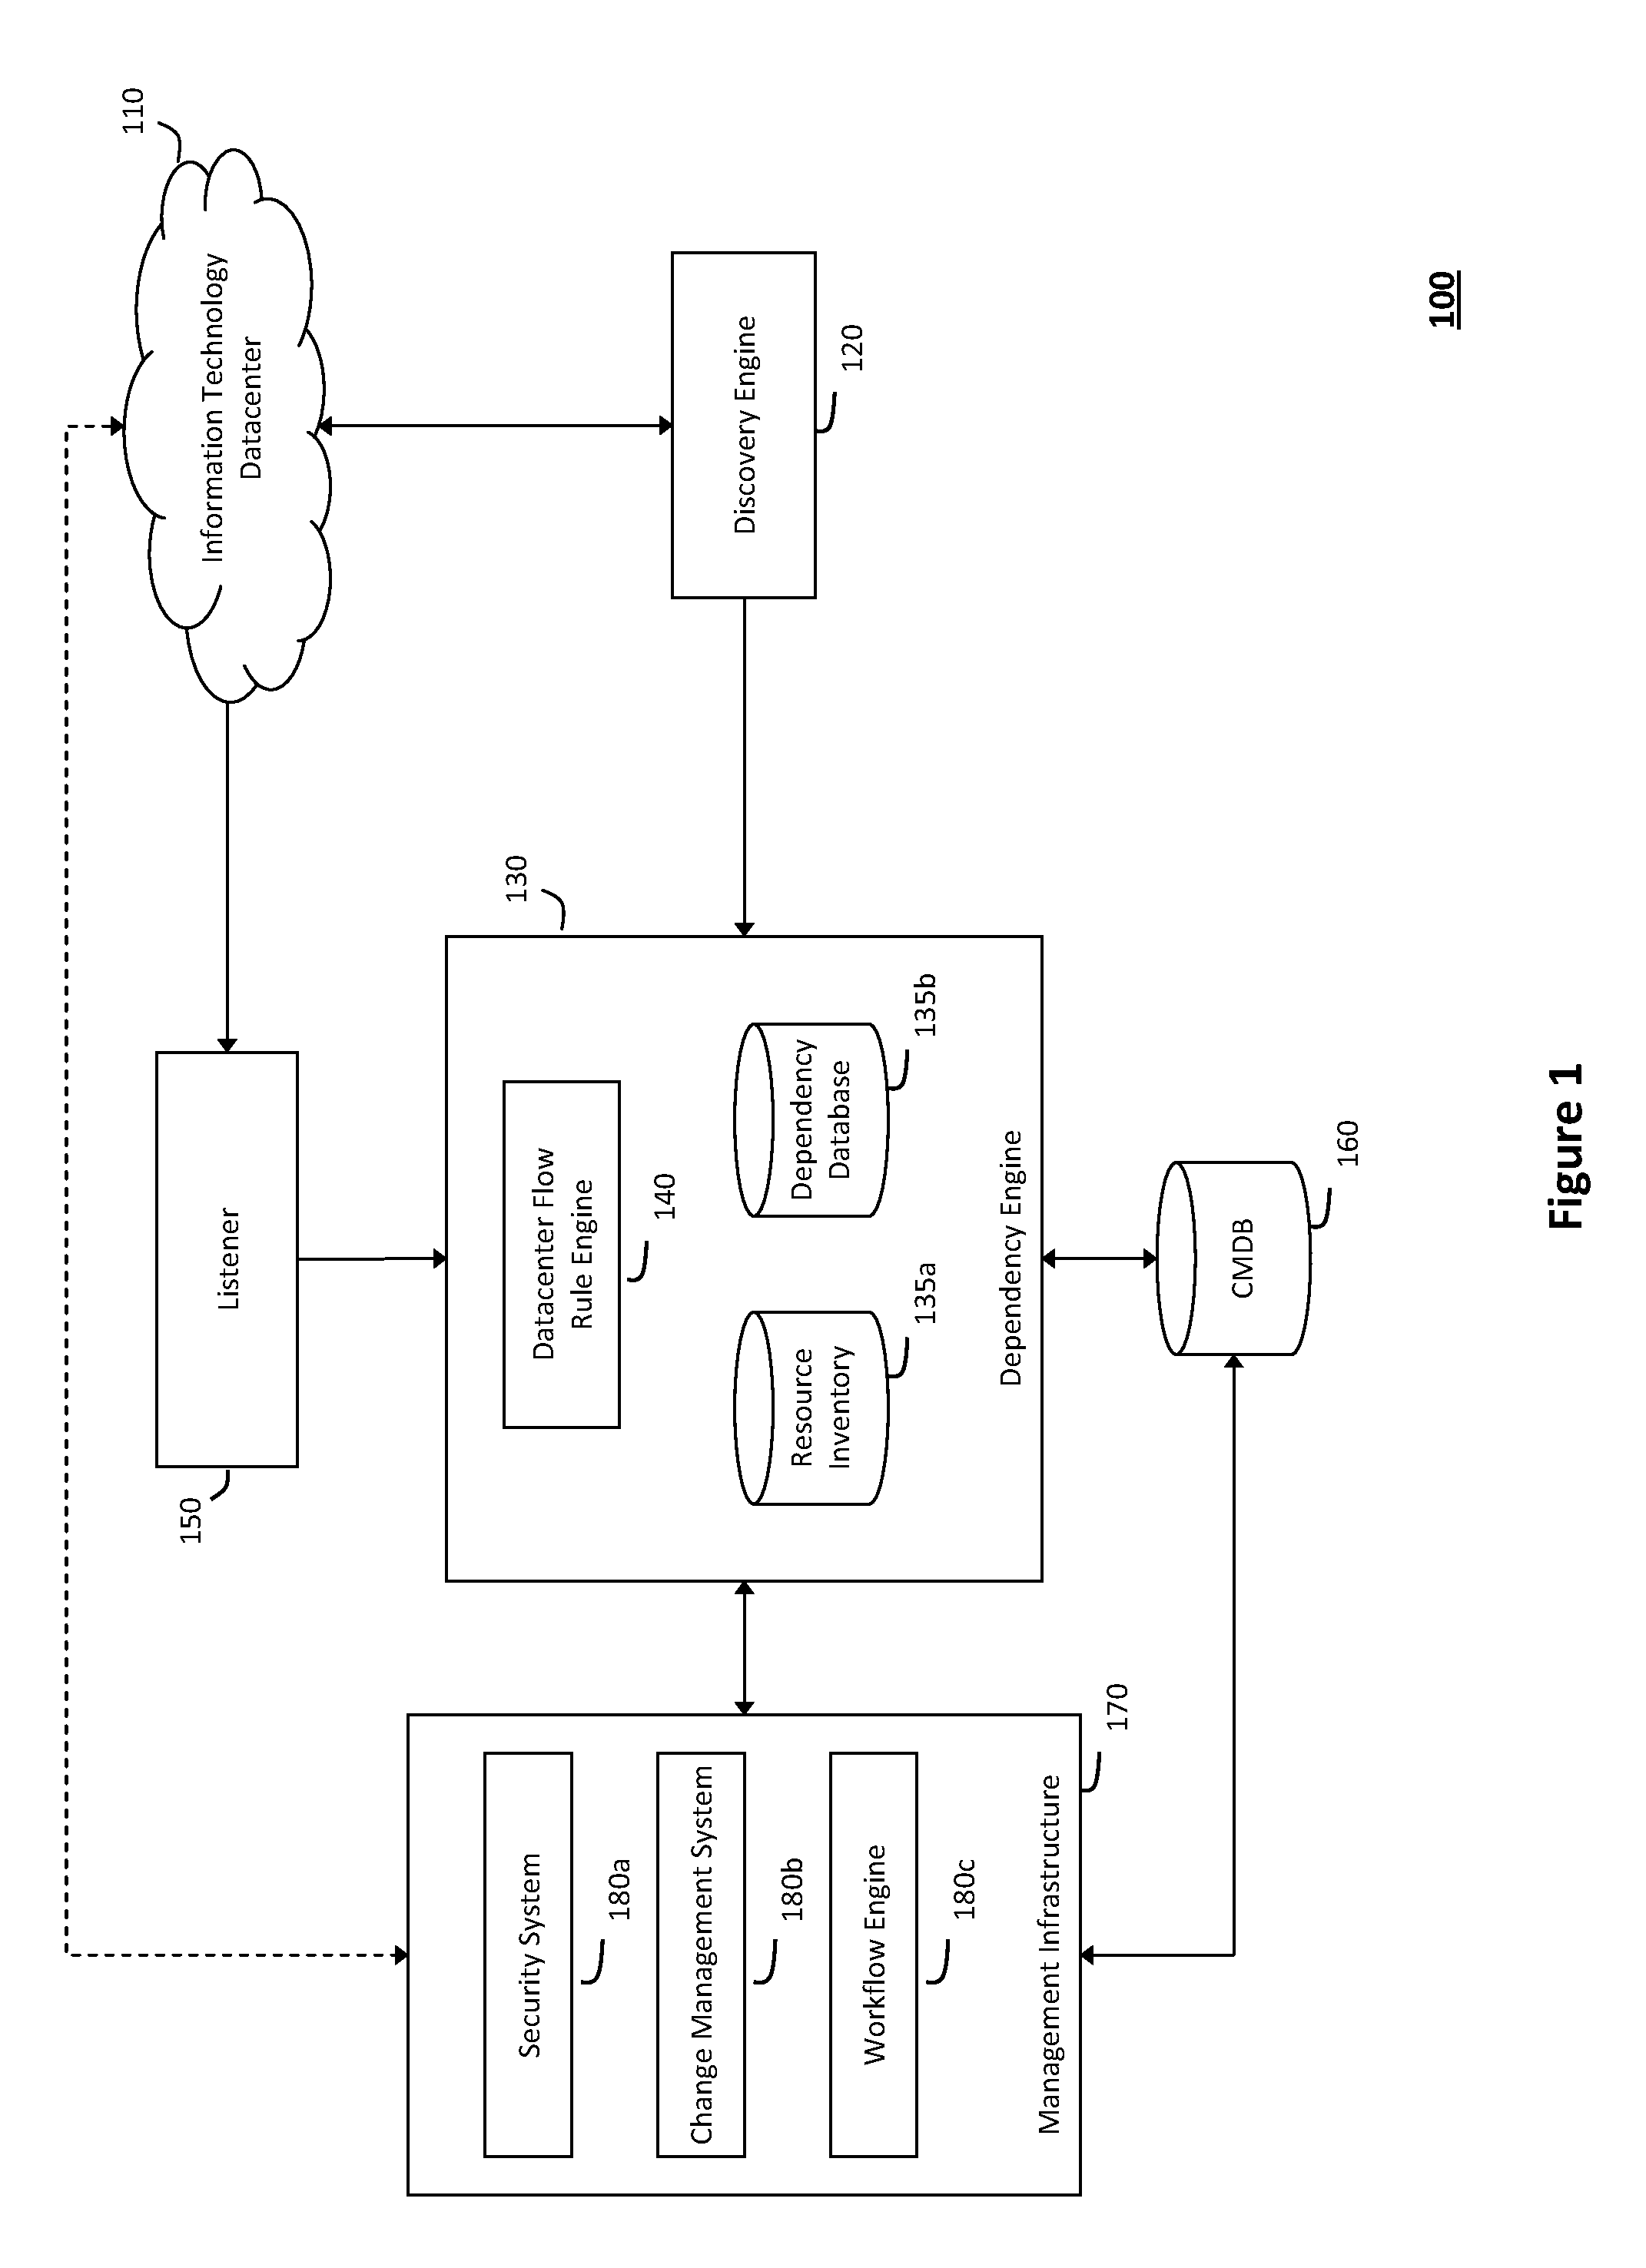 System and method for detecting real-time security threats in a network datacenter